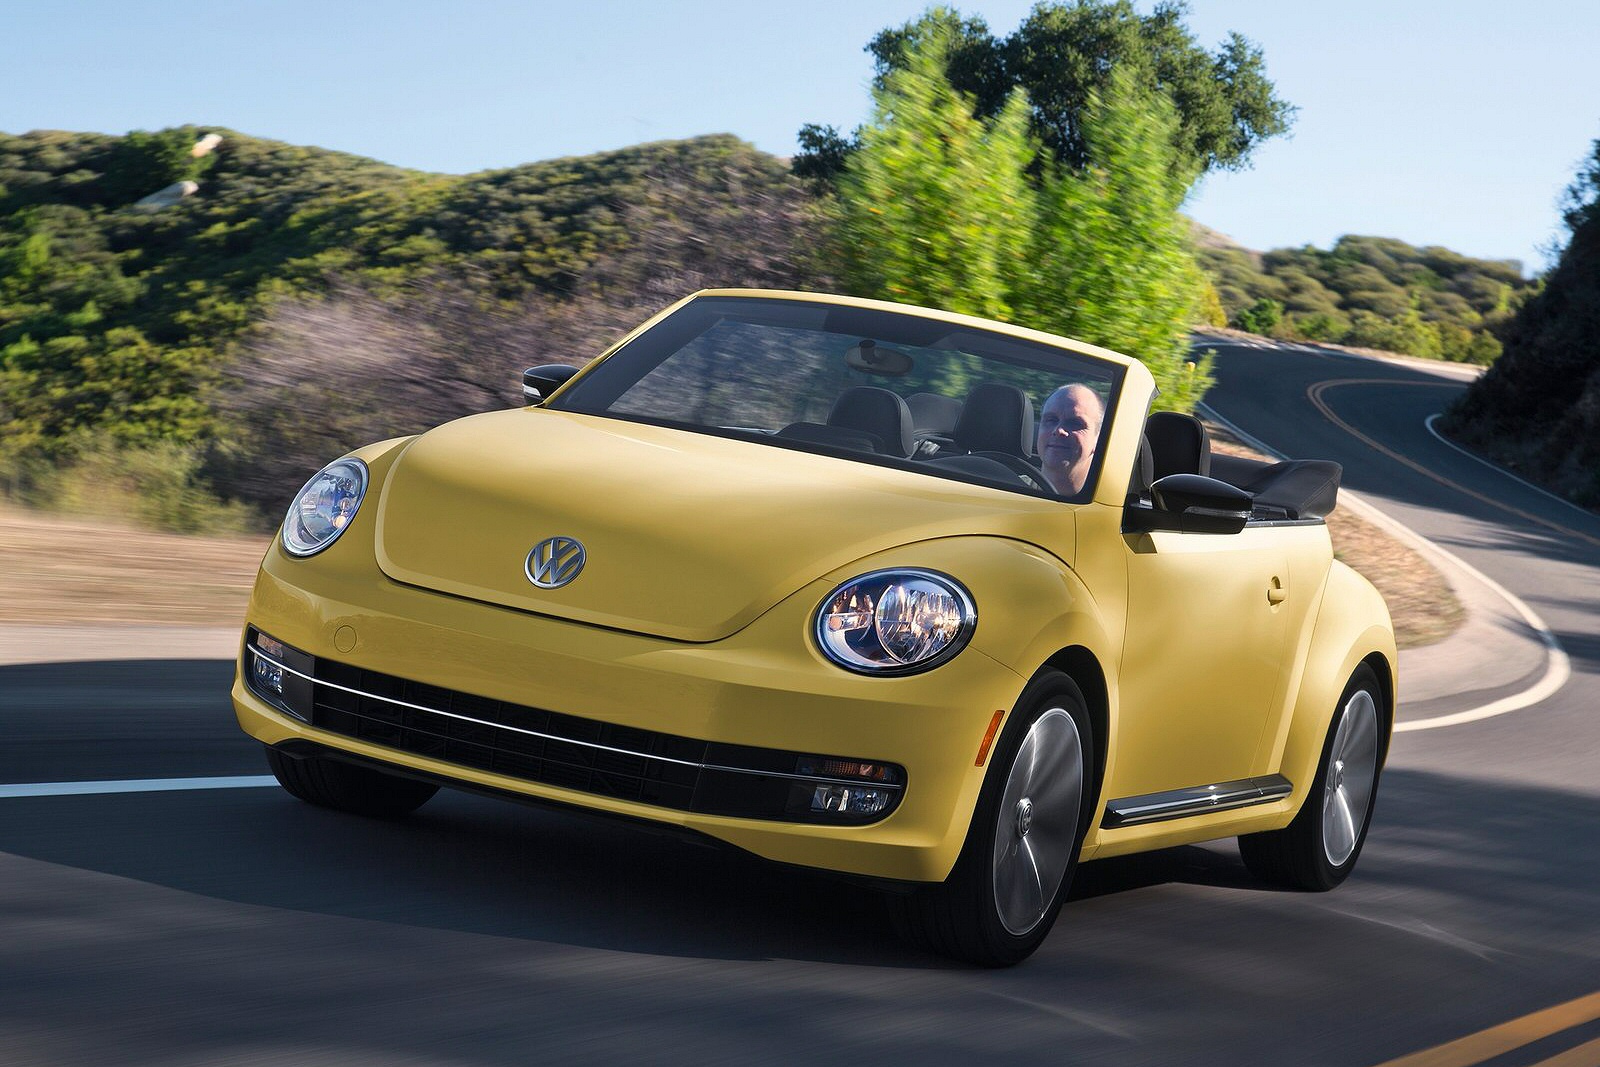 Front view of 2015 Volkswagen Beetle Cabriole